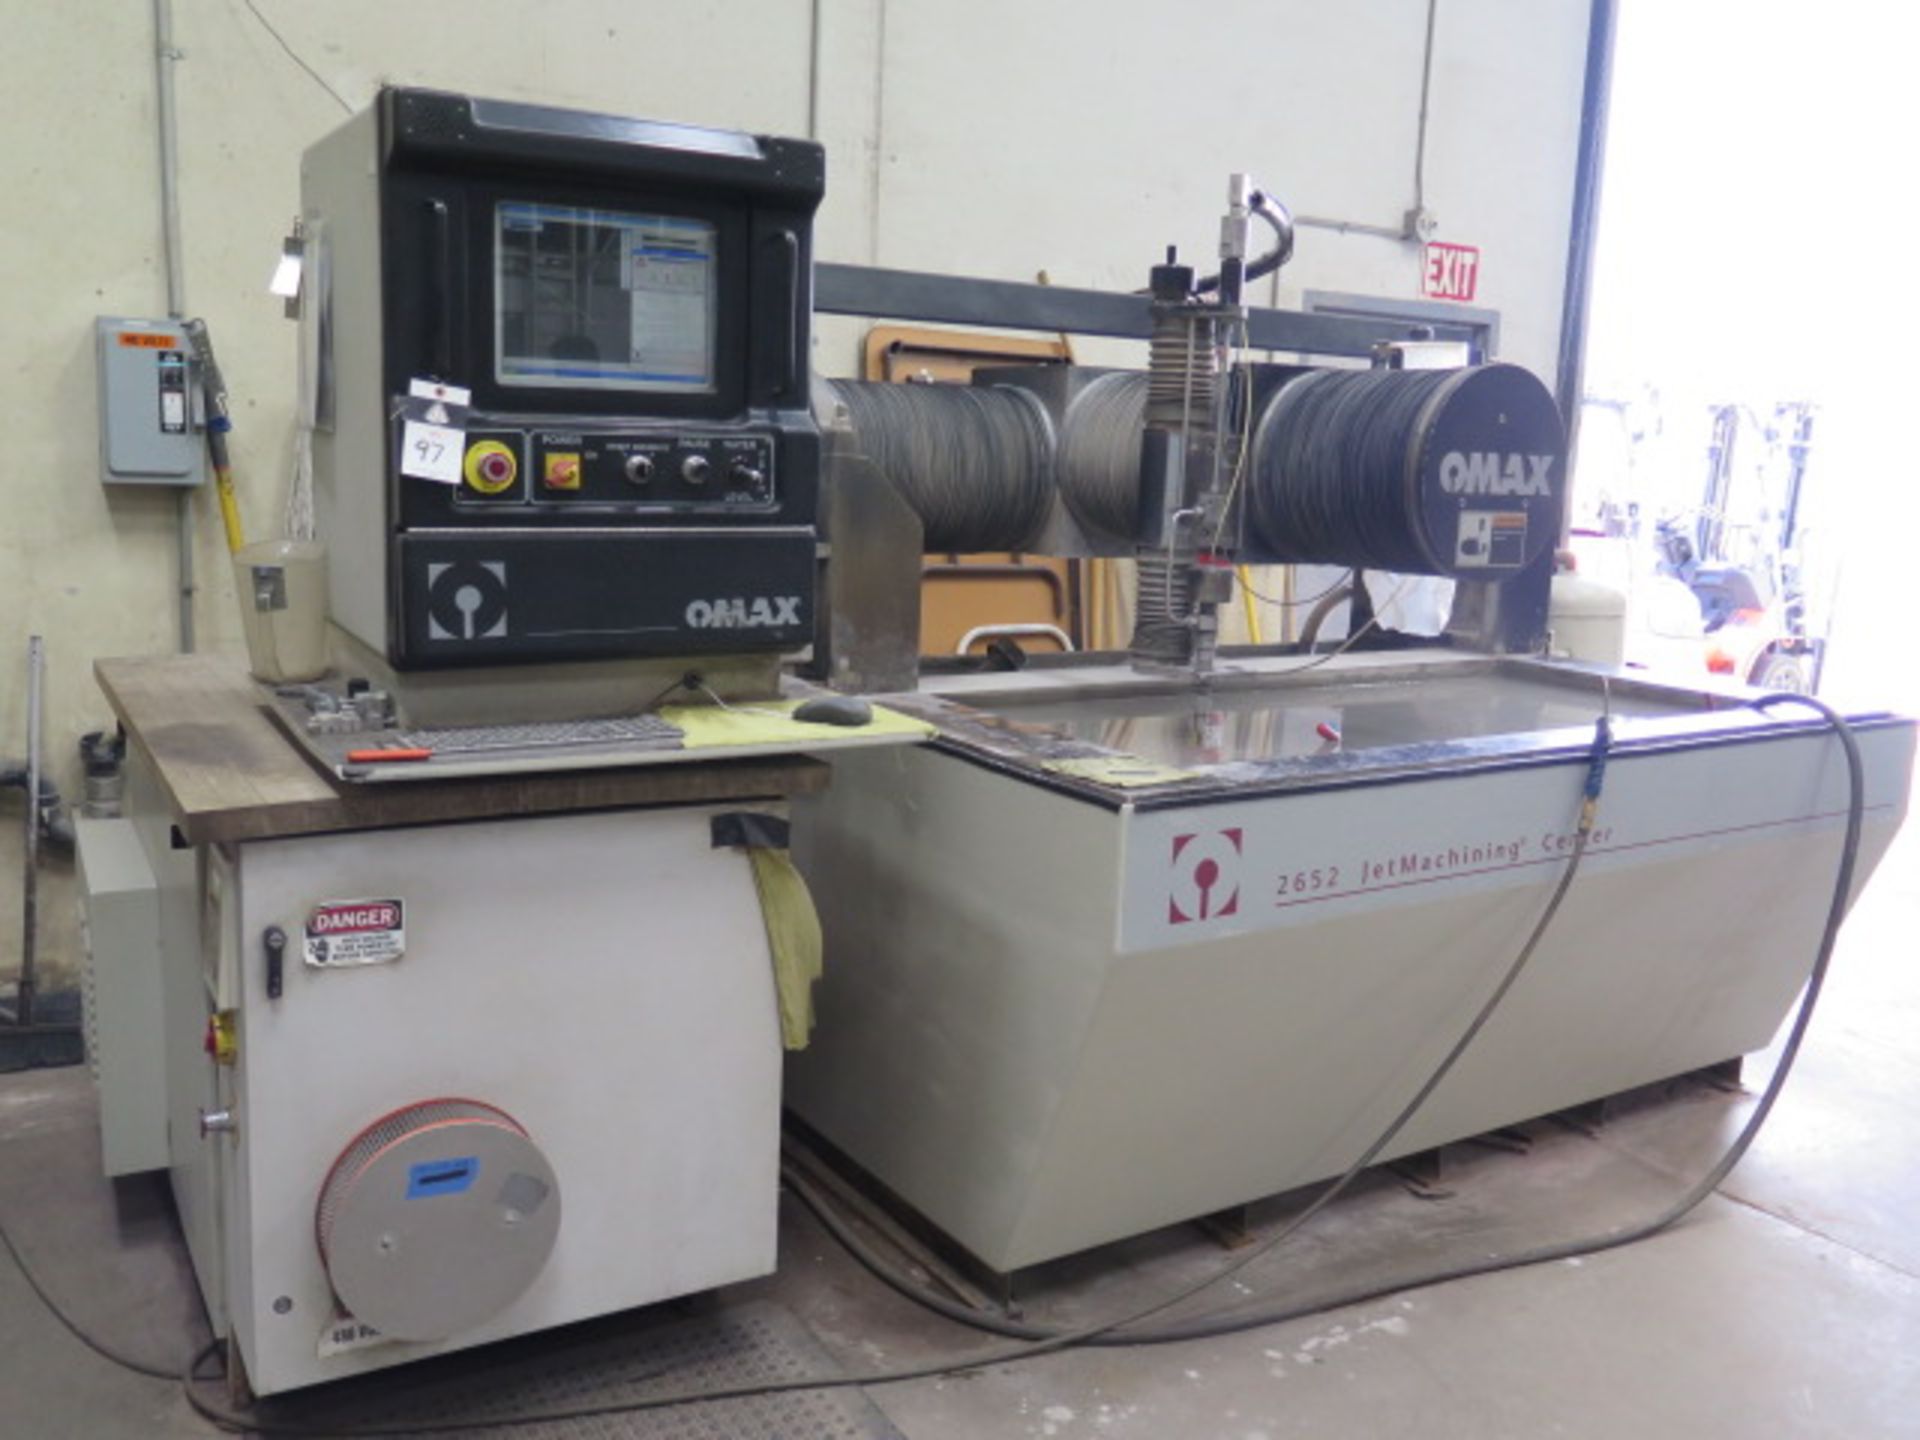 Omax mdl. 2652 2’ x 4’ CNC WaterJet Machine s/n B511824 w/ Omax MAKE Precision Velocity, SOLD AS IS - Image 3 of 17